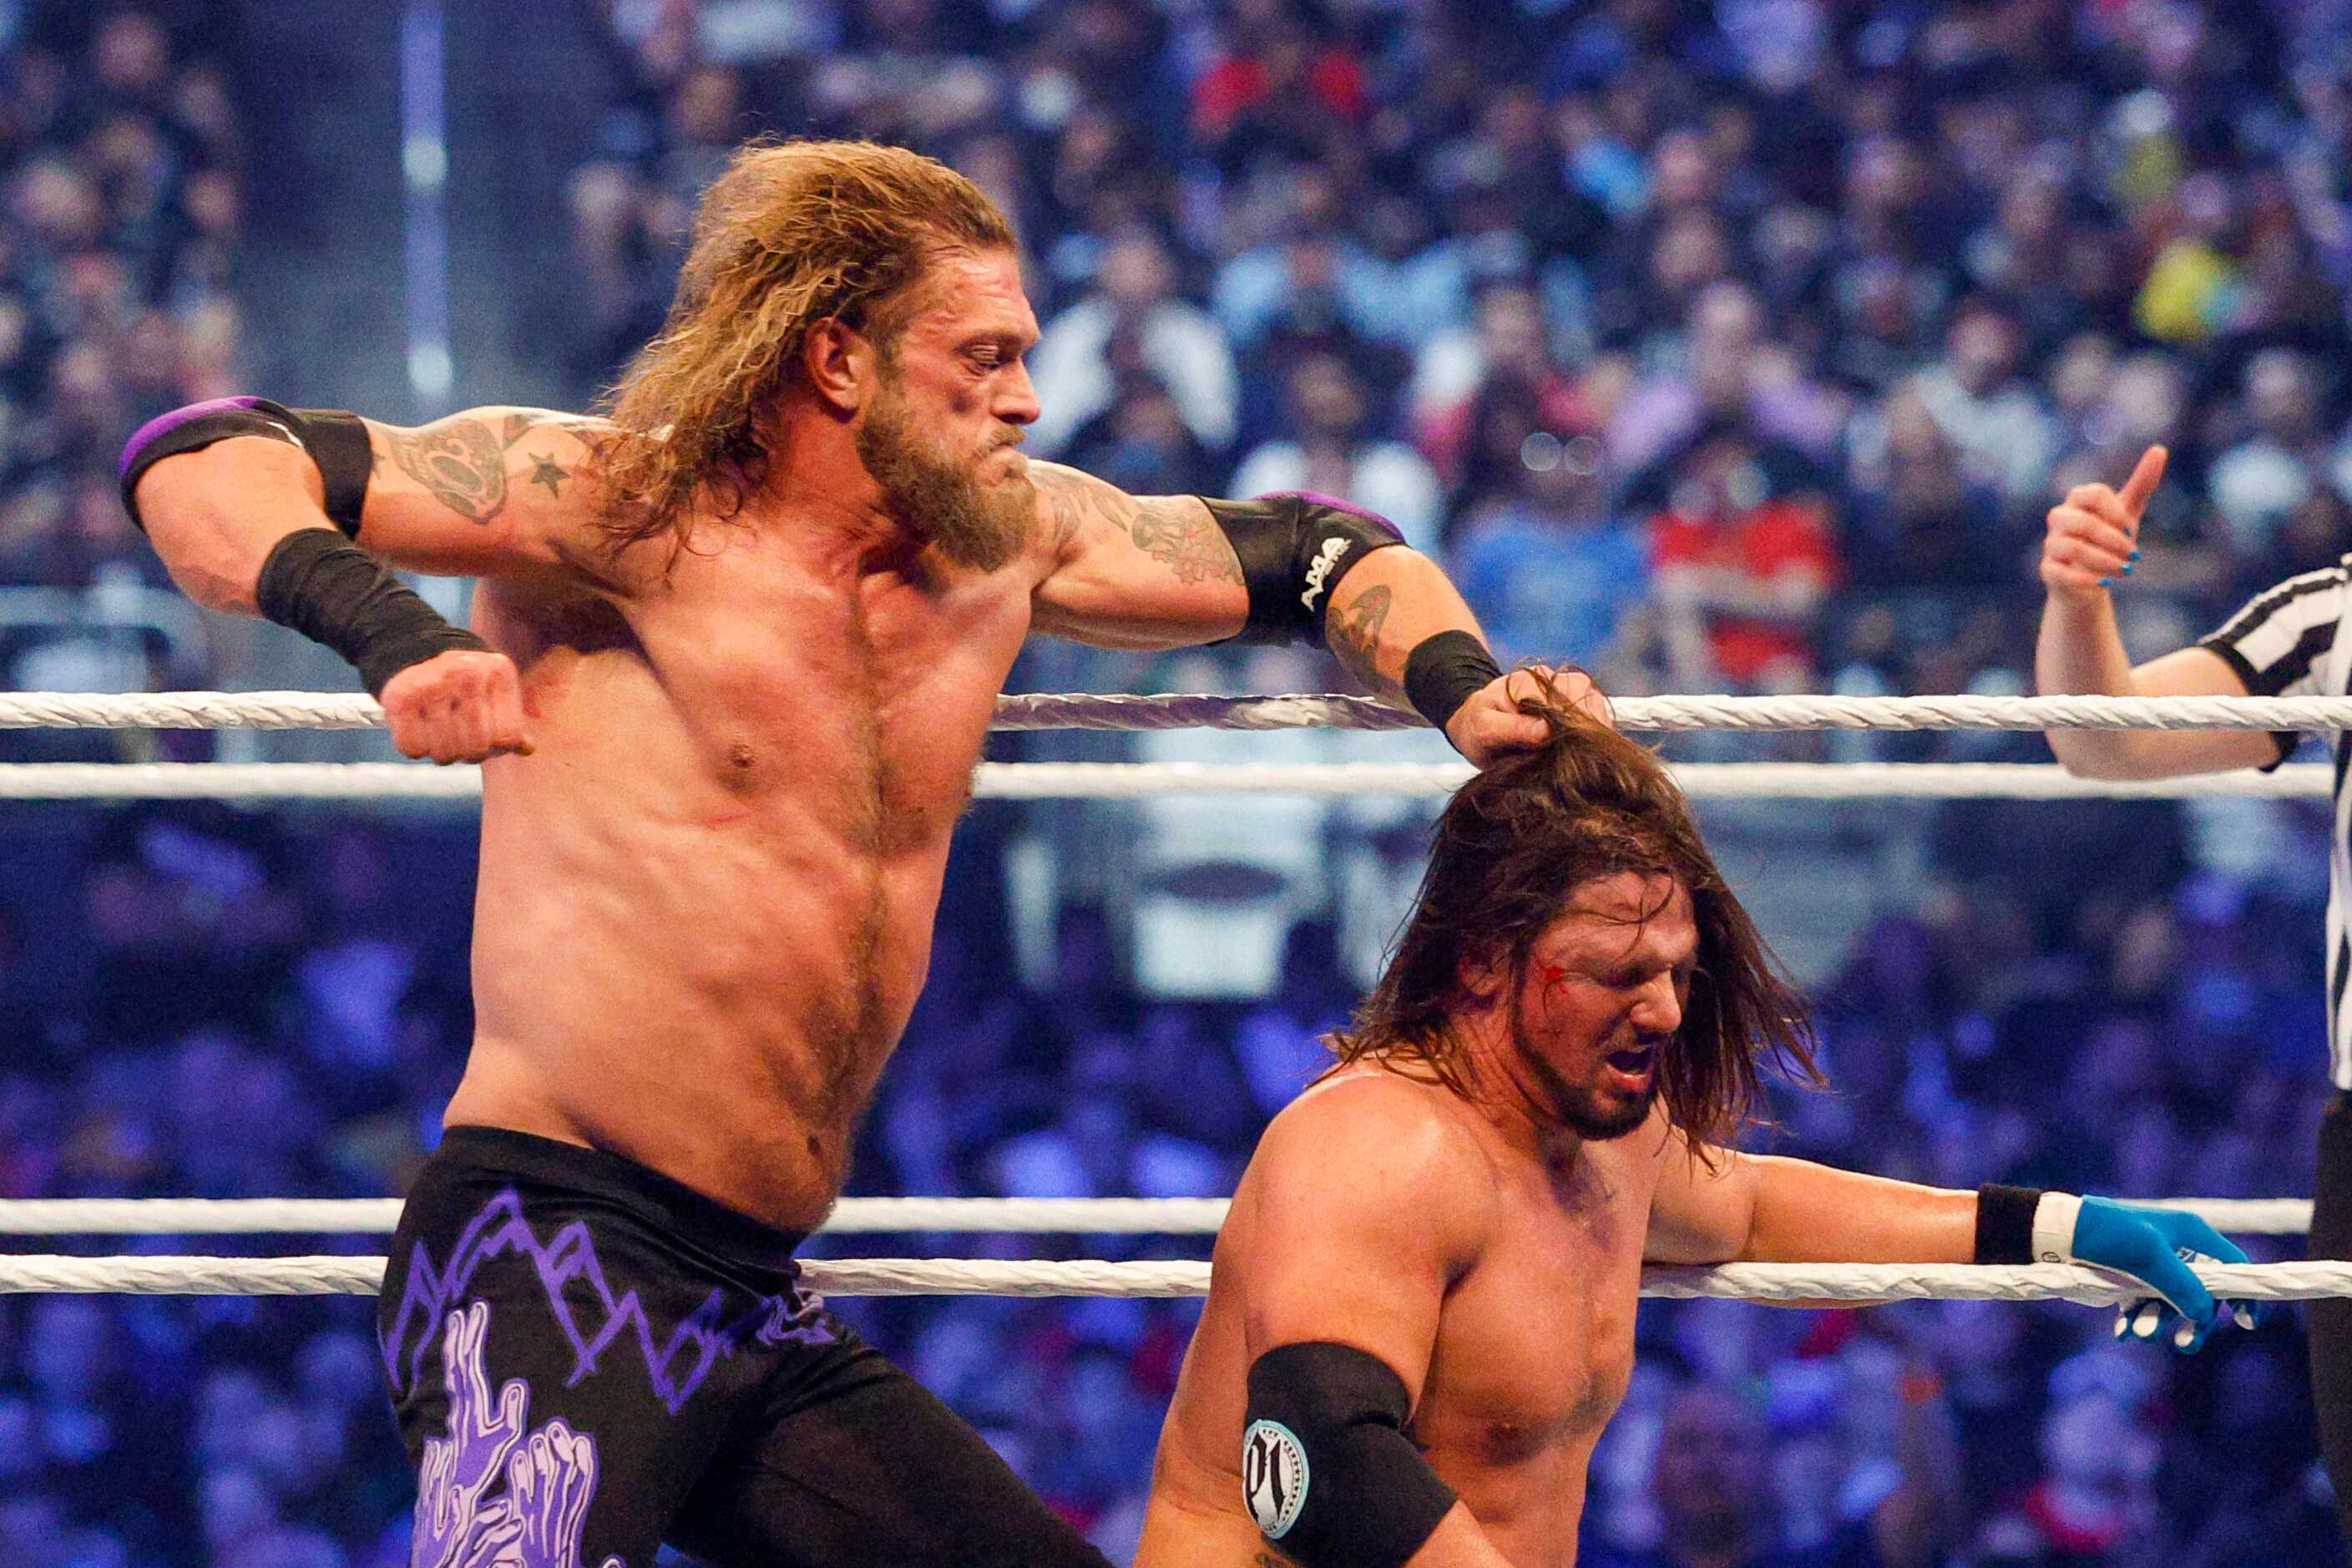 Edge punches AJ Styles during a match at WrestleMania Sunday at AT&T Stadium in Arlington,...